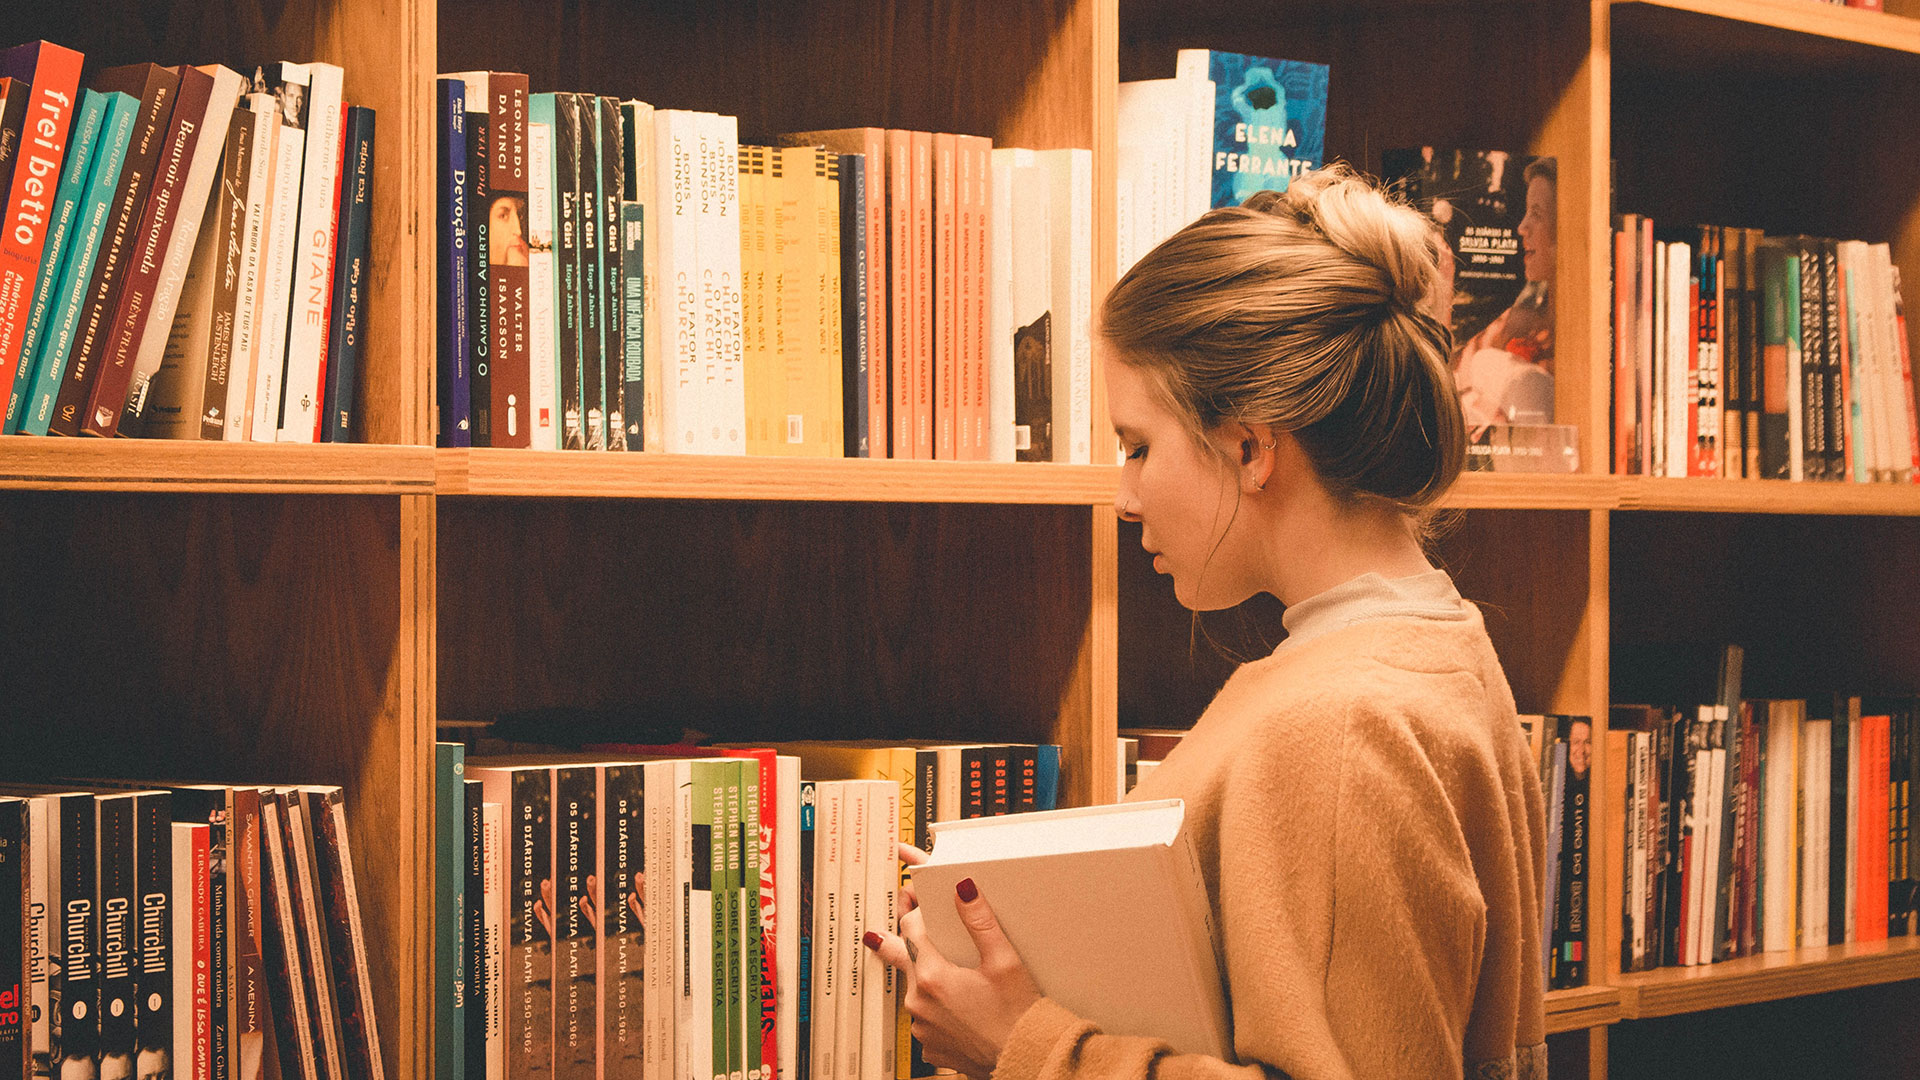 Student looking at books on library shelves